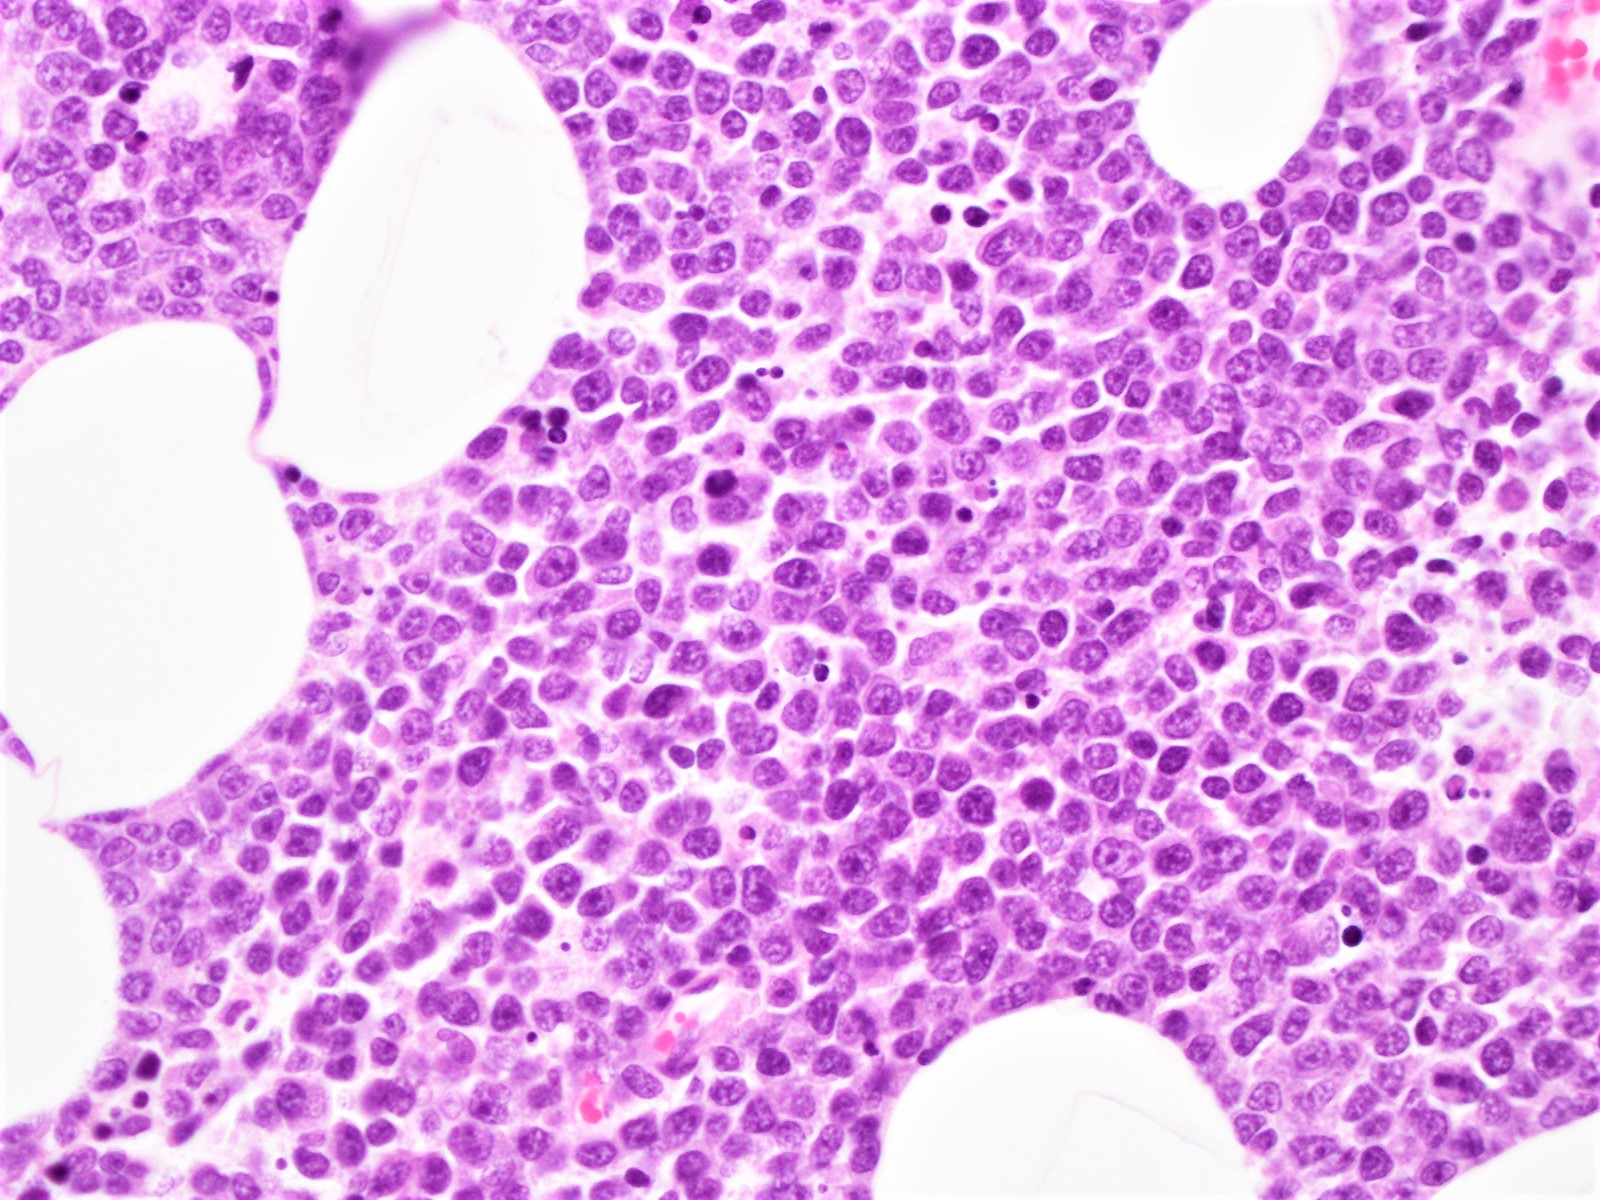 H&E stained section of the abdominal wall mass